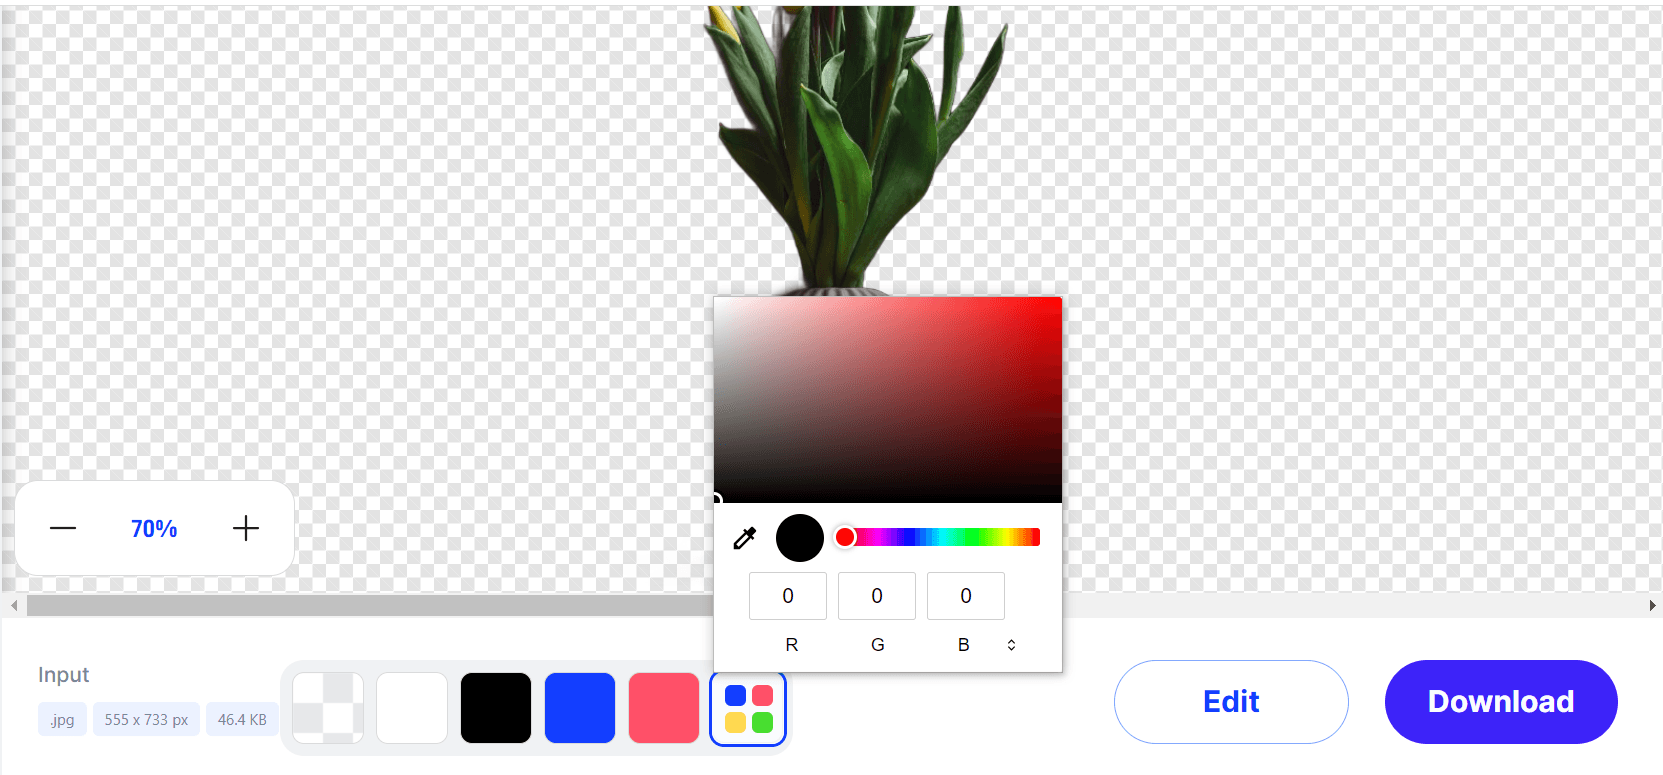 Equipped with an infinite color palette, it allows you to choose the right shade for your subject’s background